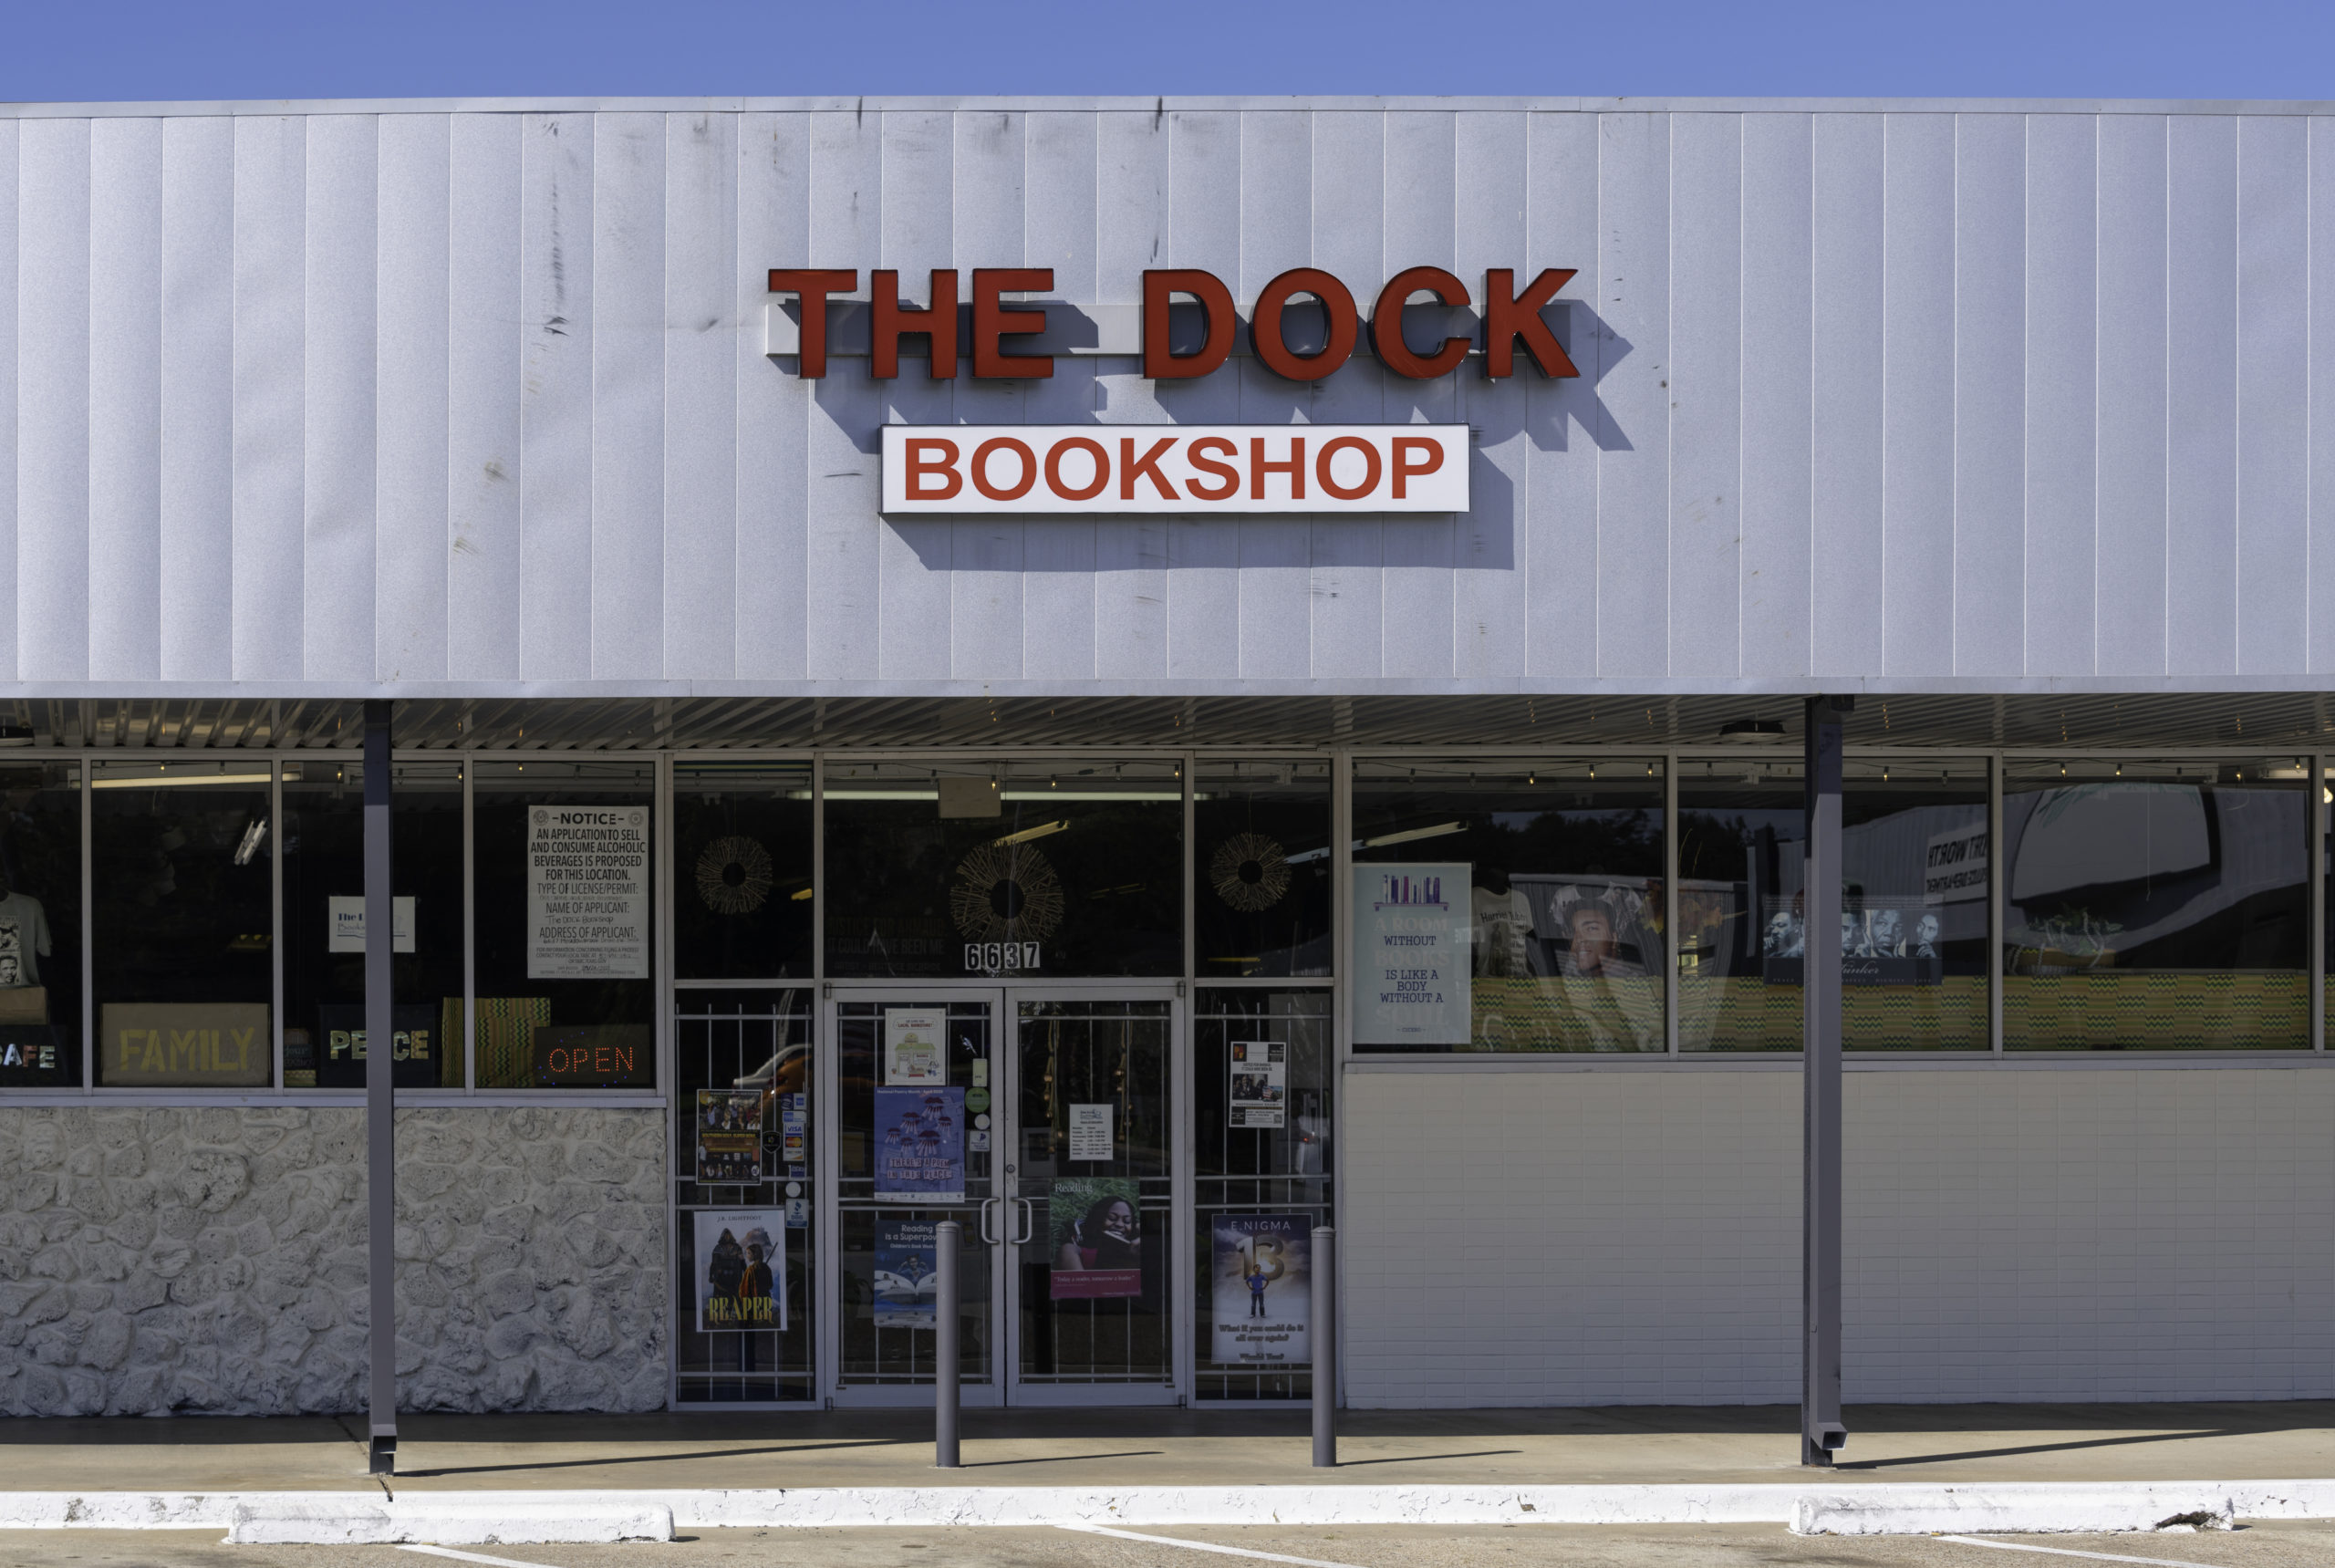 The Dock Bookshop is a strip mall-style store with welcoming signs in the windows with words like 